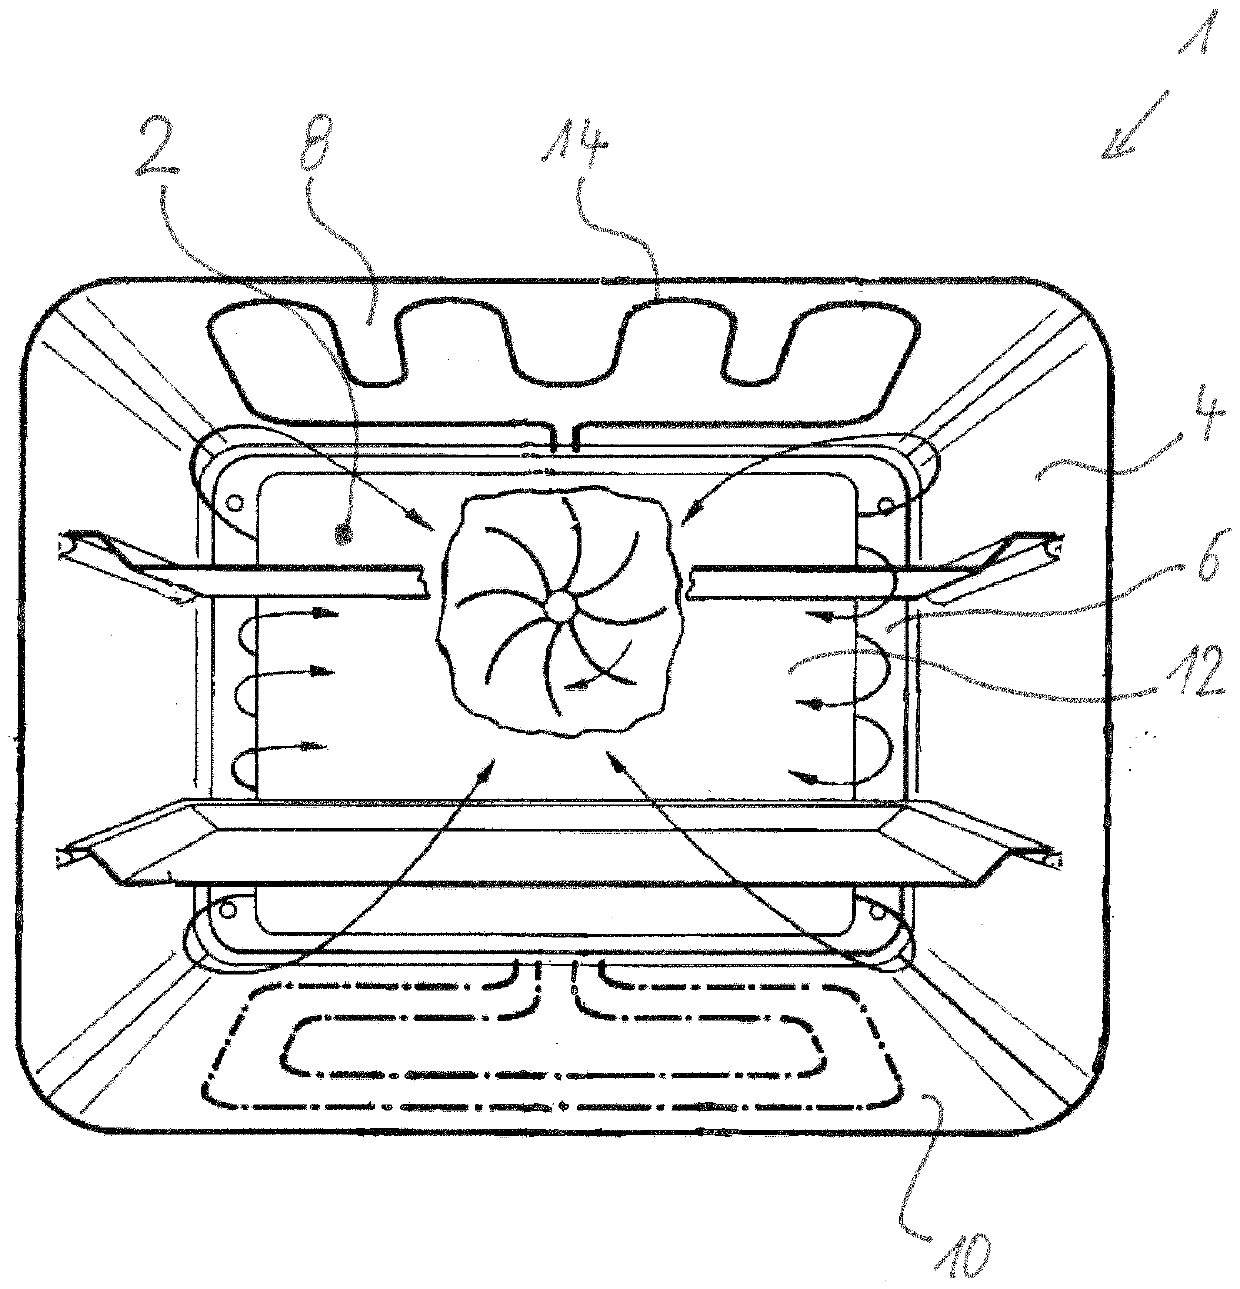 Domestic appliance having connecting element